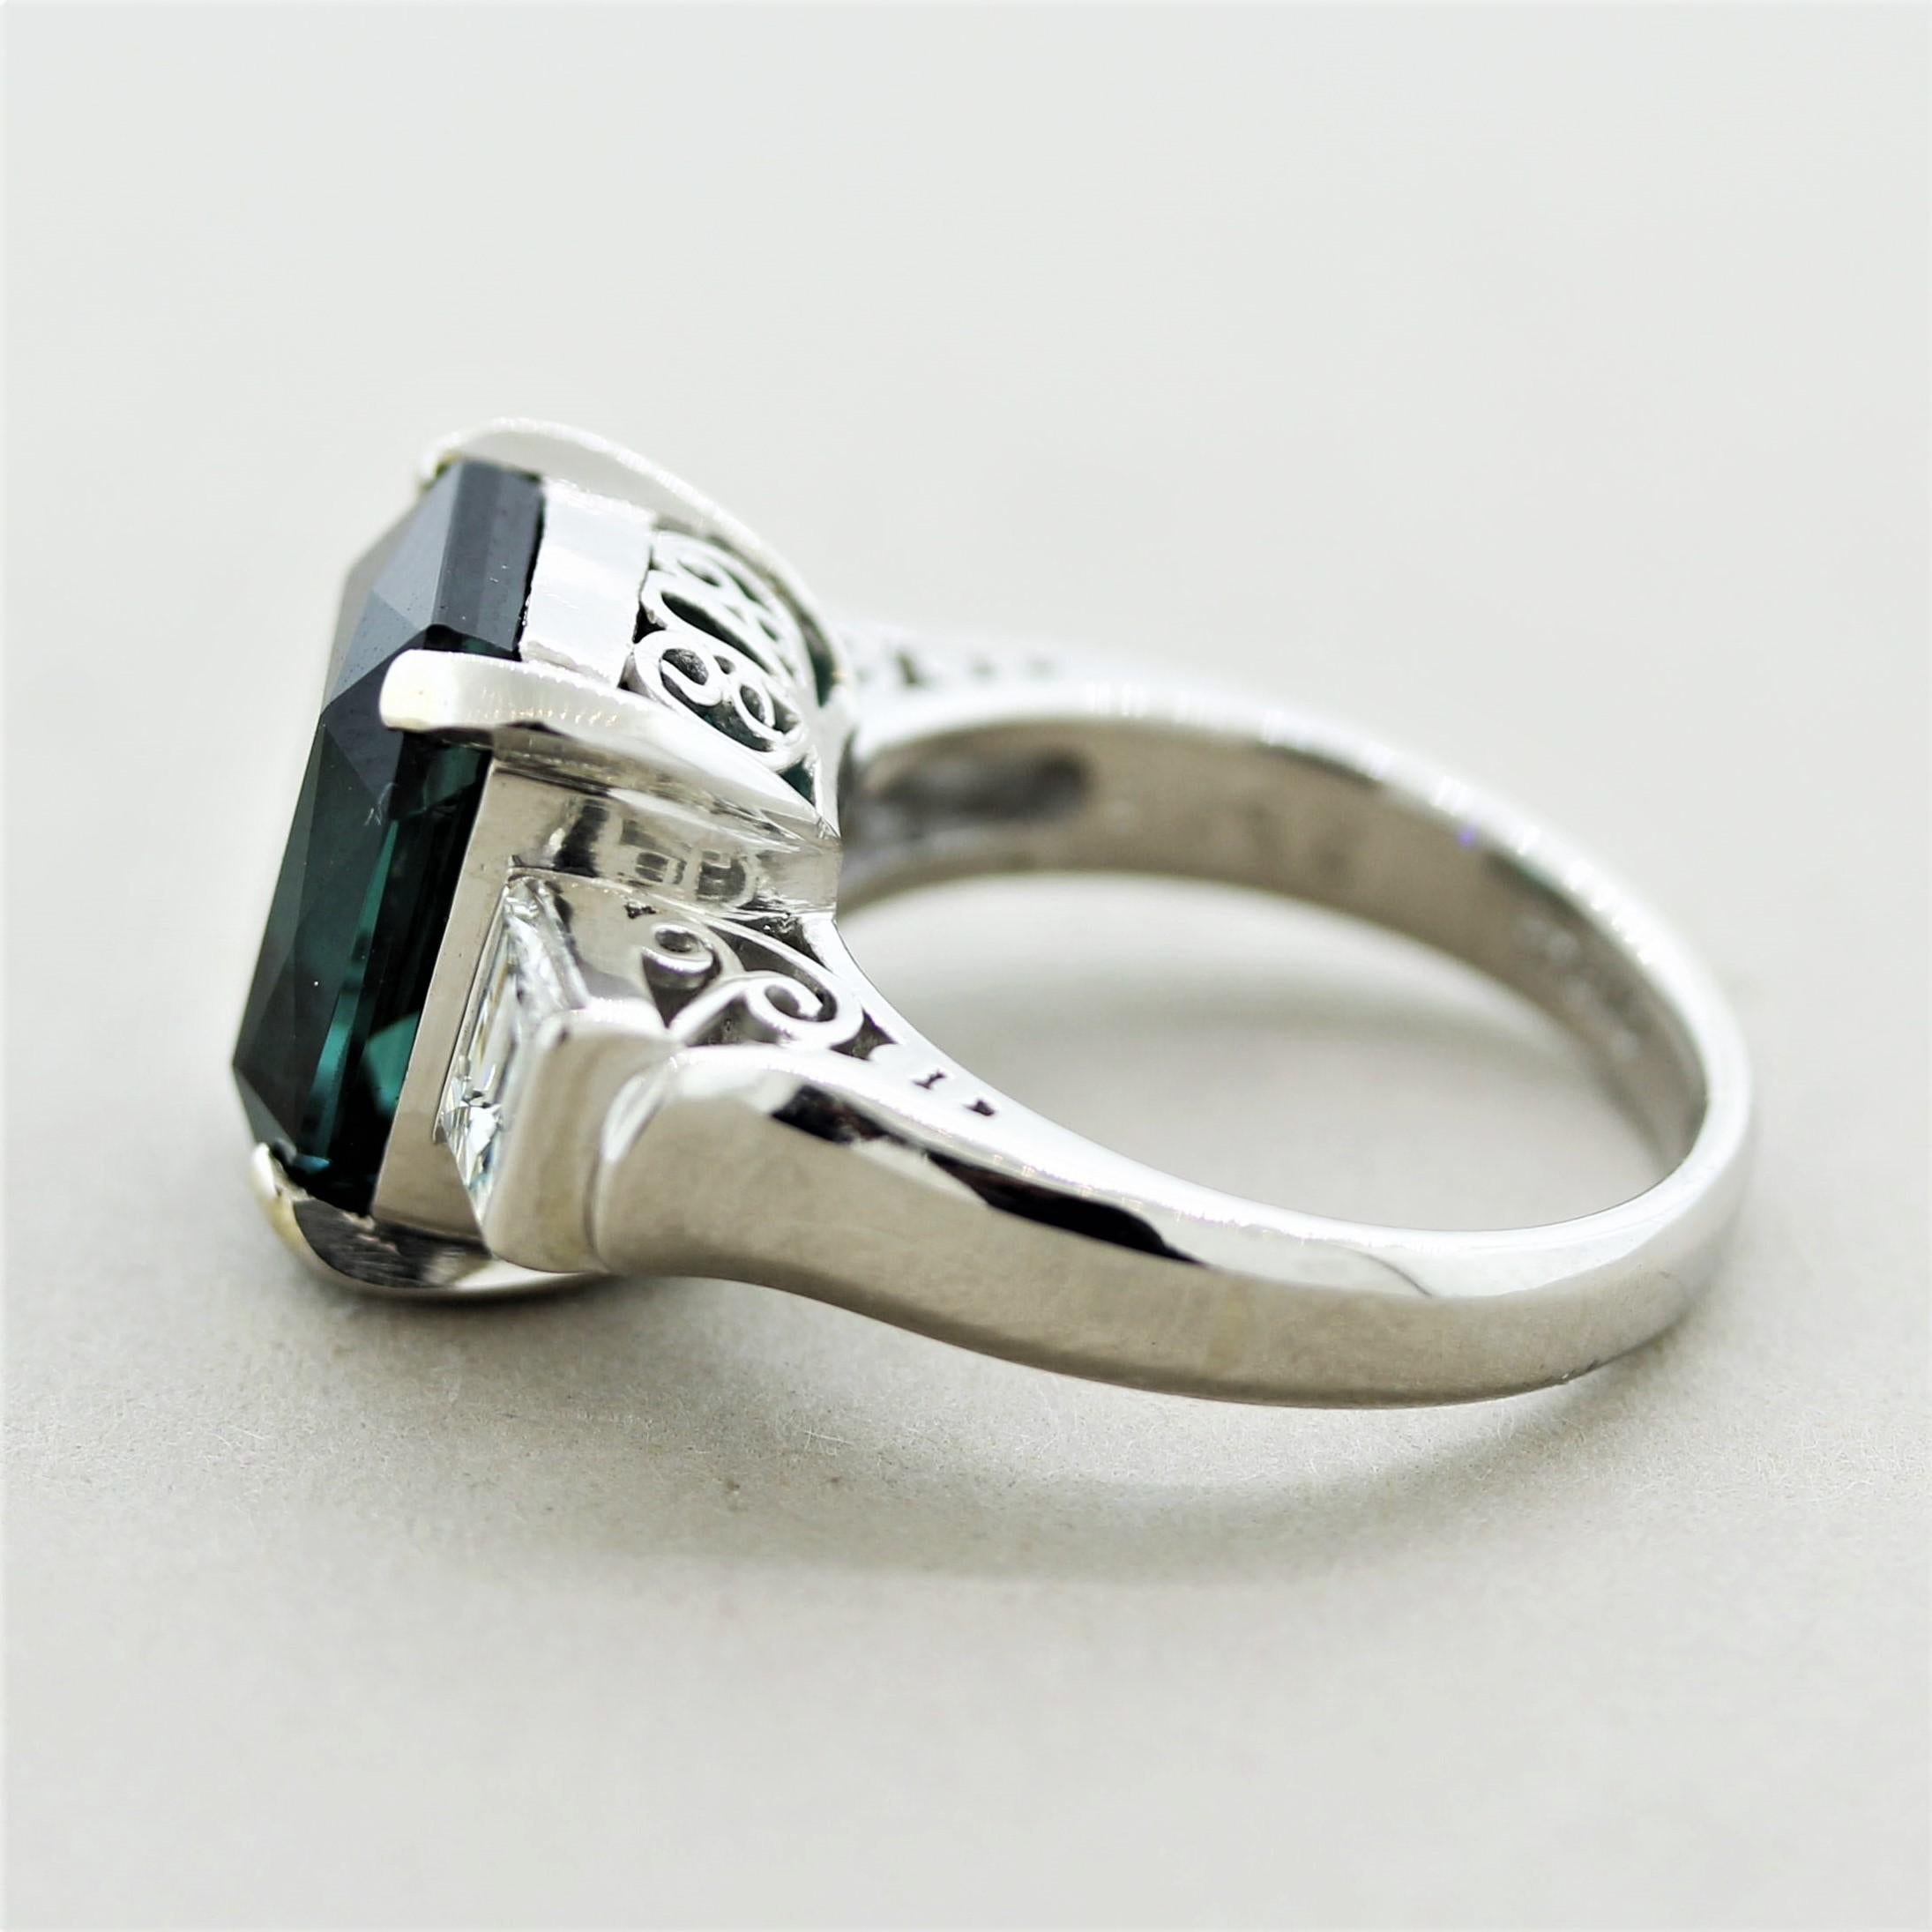 3 stone ring designs for male